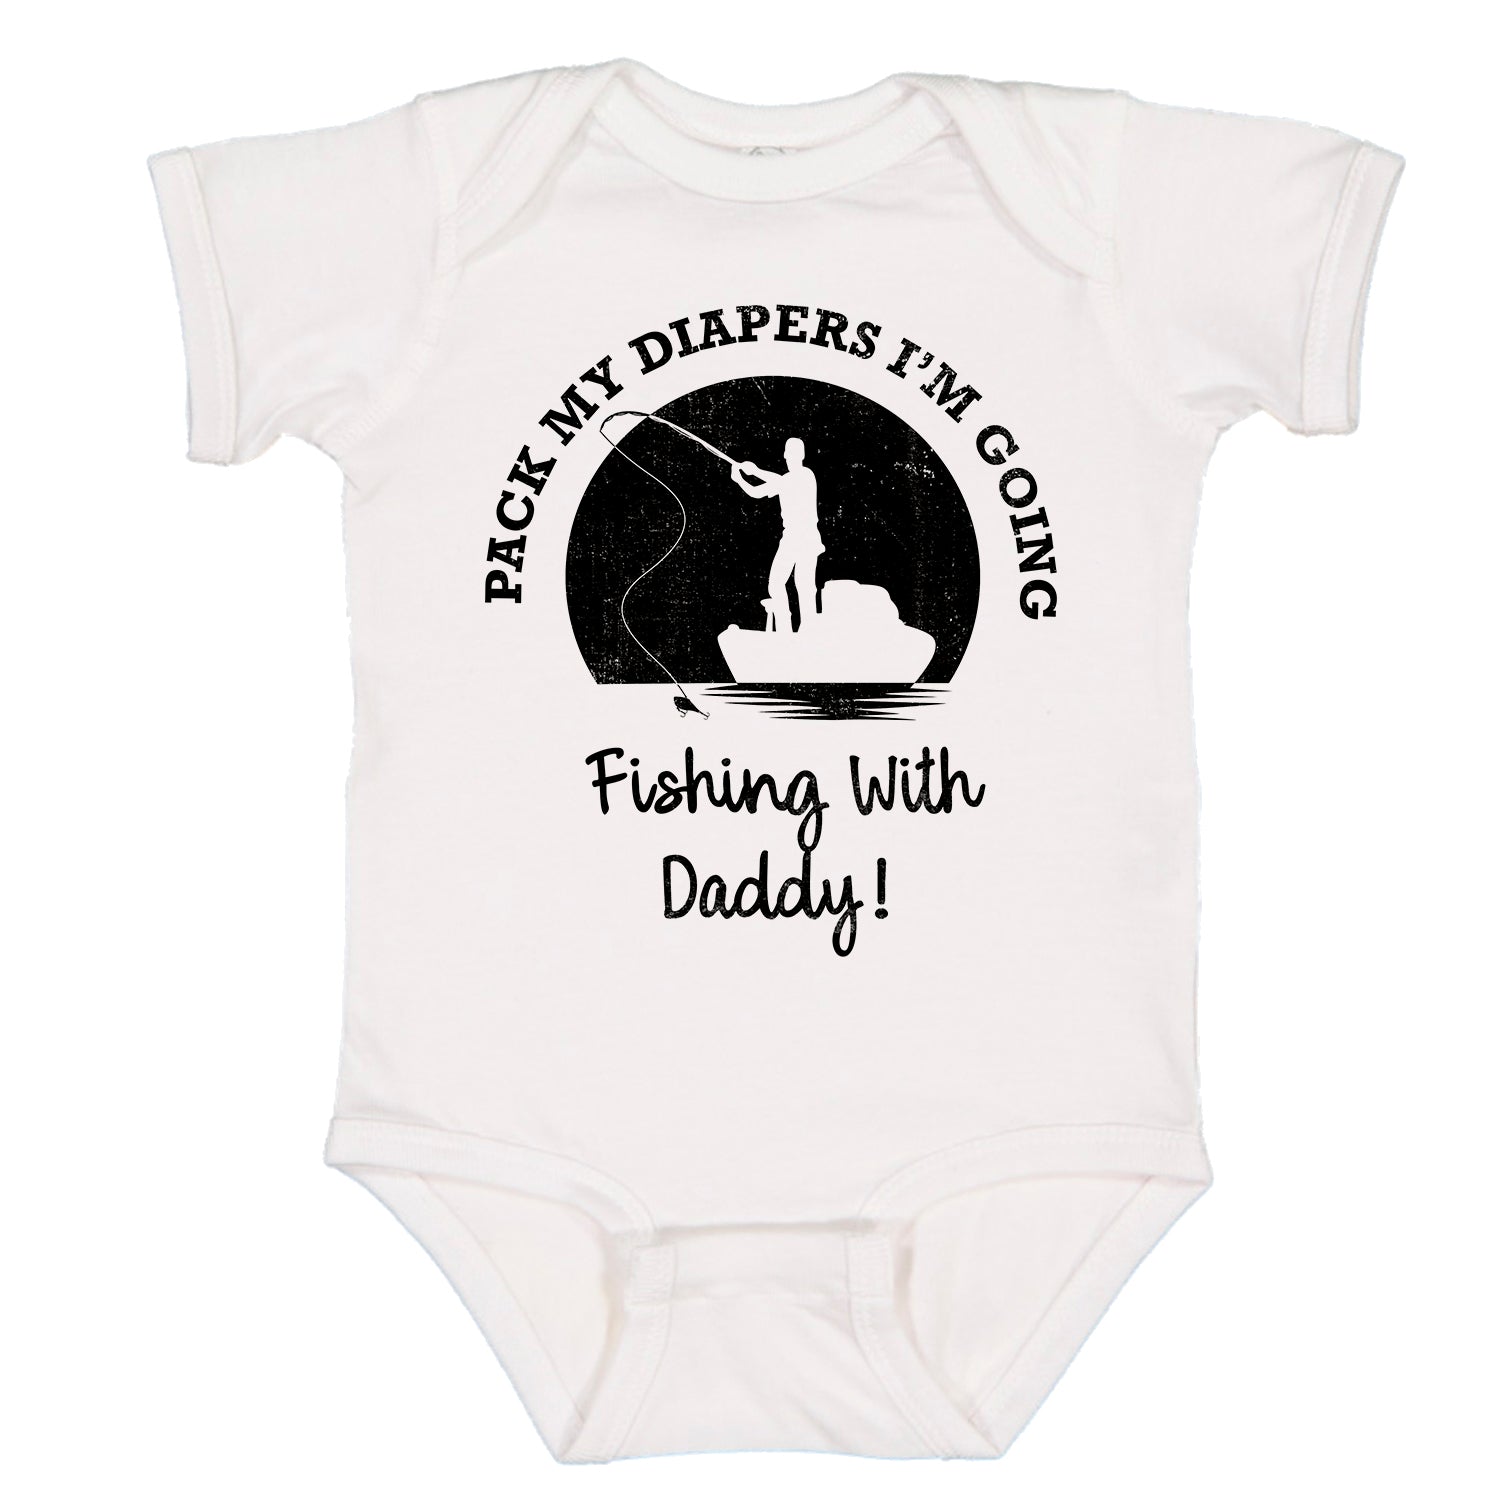 Ink Trendz Pack My Diapers I'm Going Fishing with Daddy! Cute Fishing Baby Bodysuit White / 24 Months